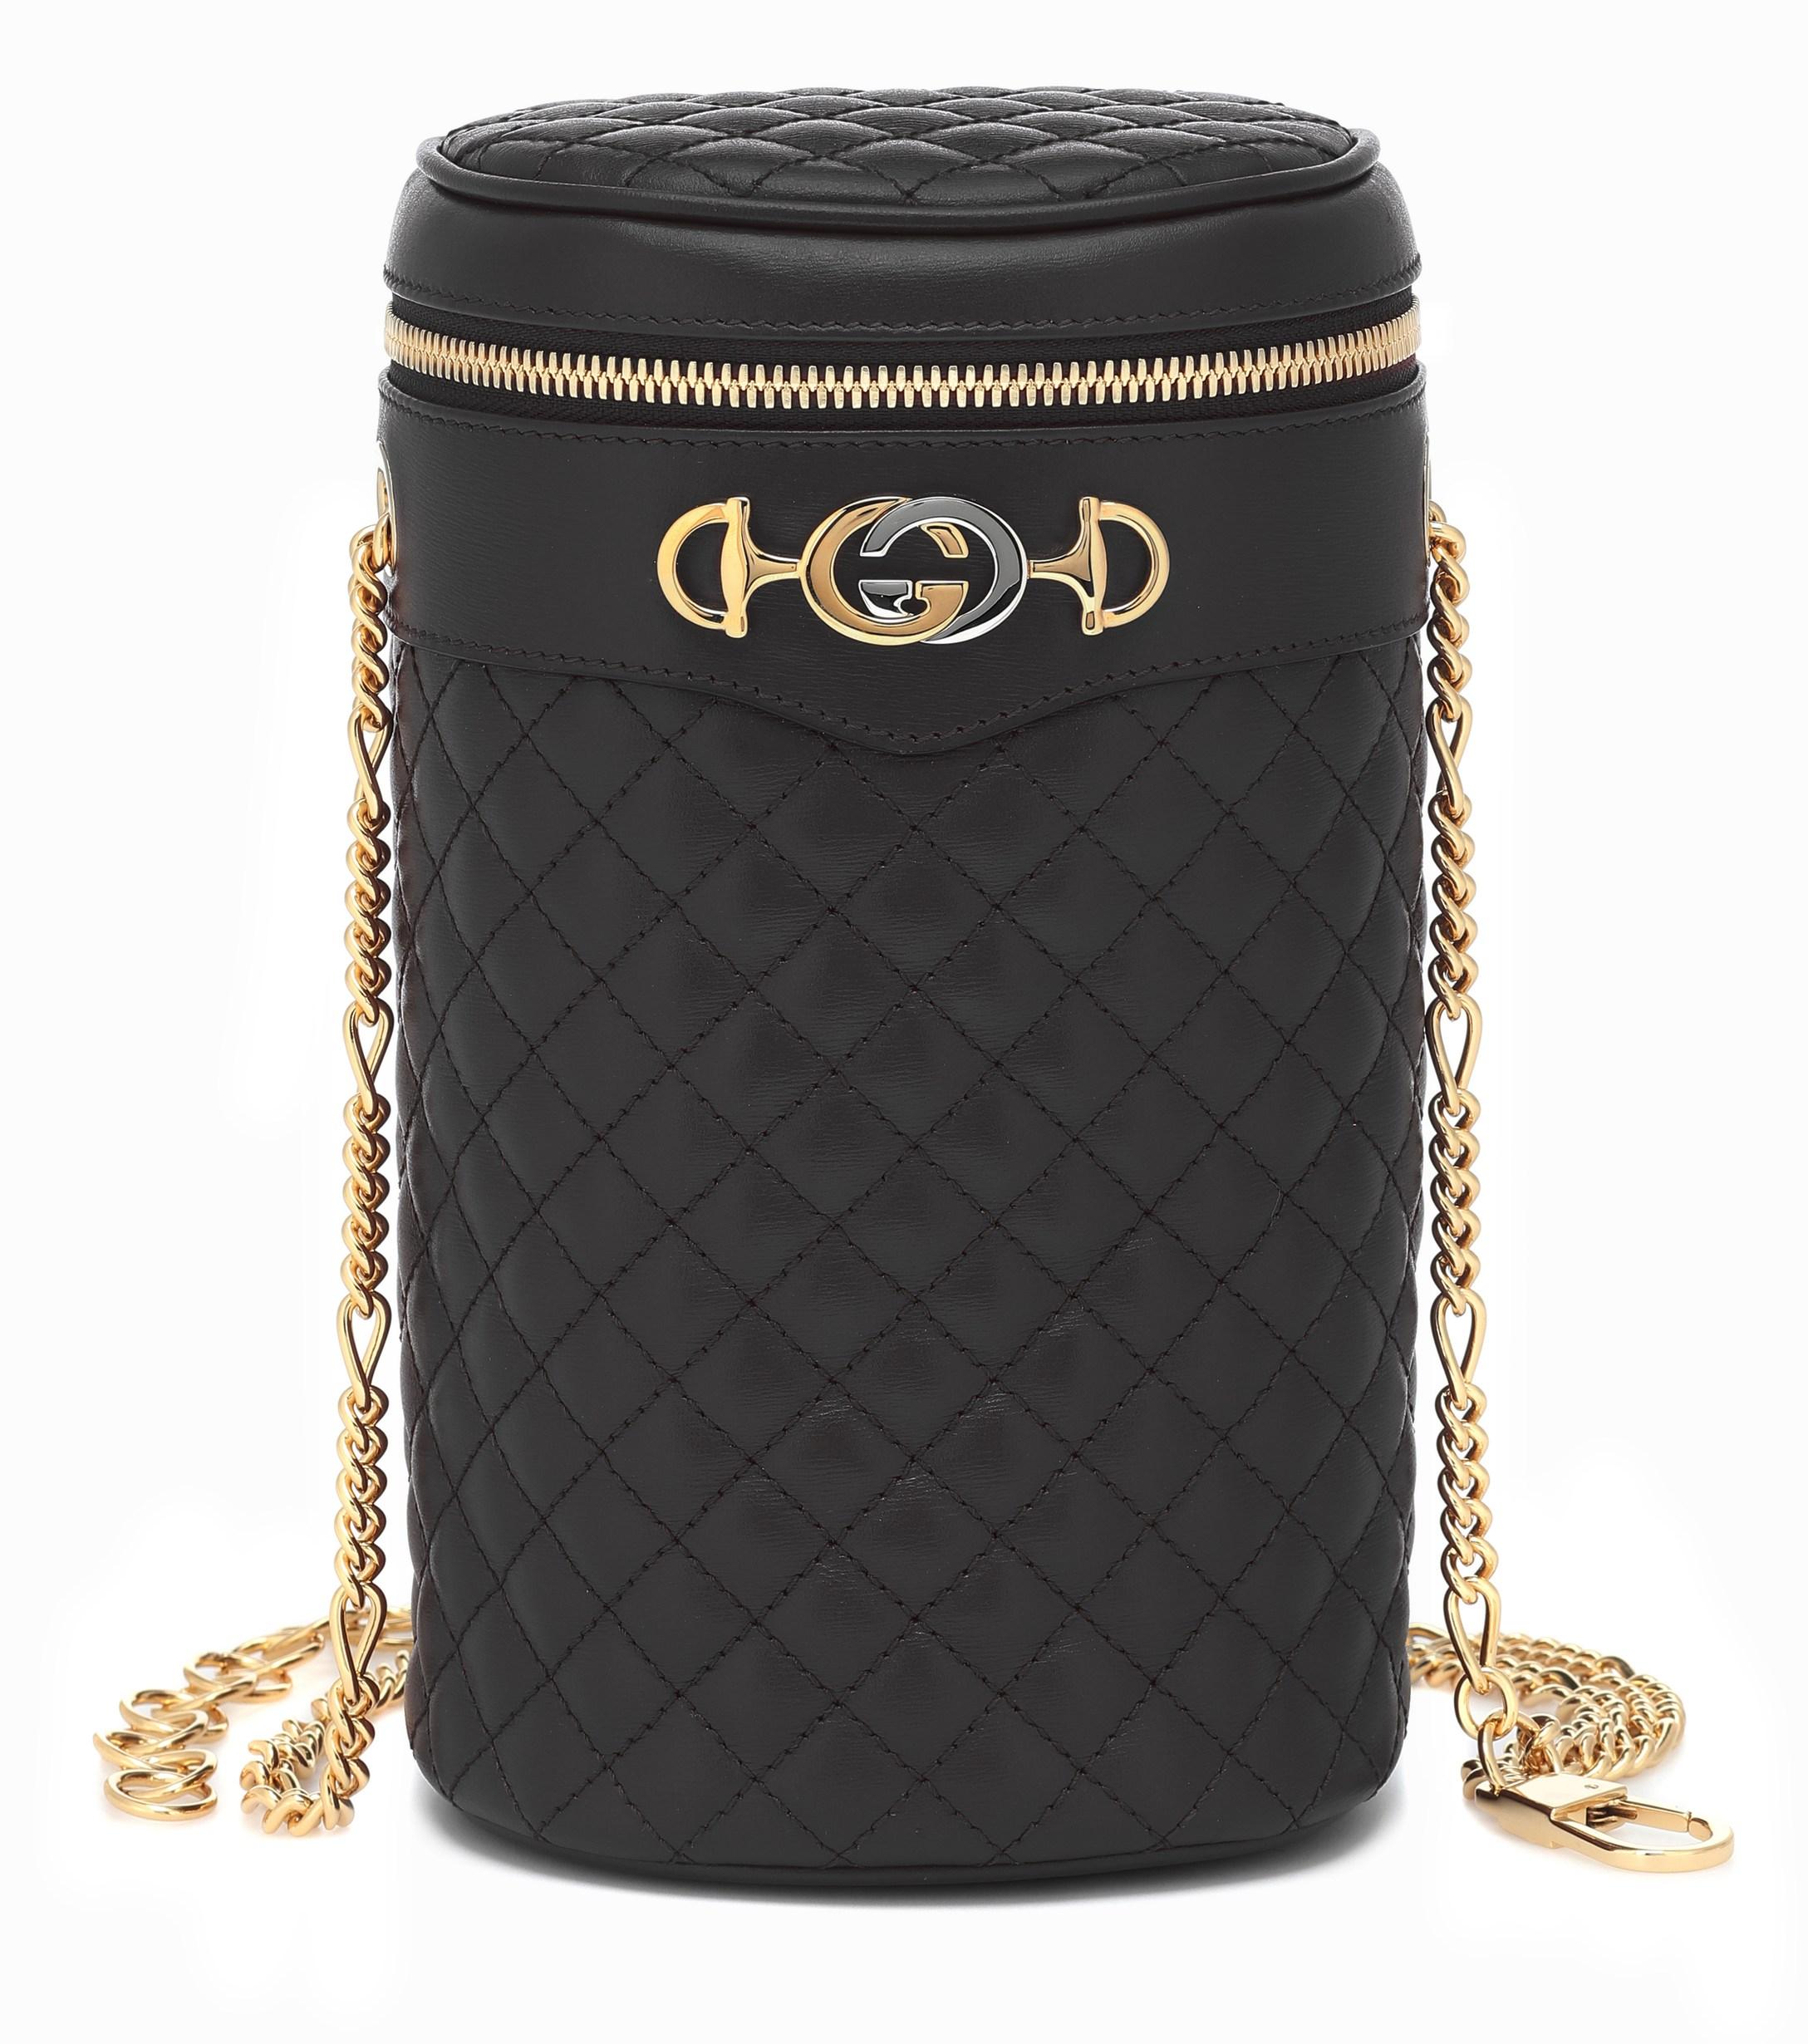 Gucci Quilted Leather Belt Bag in Black - Lyst